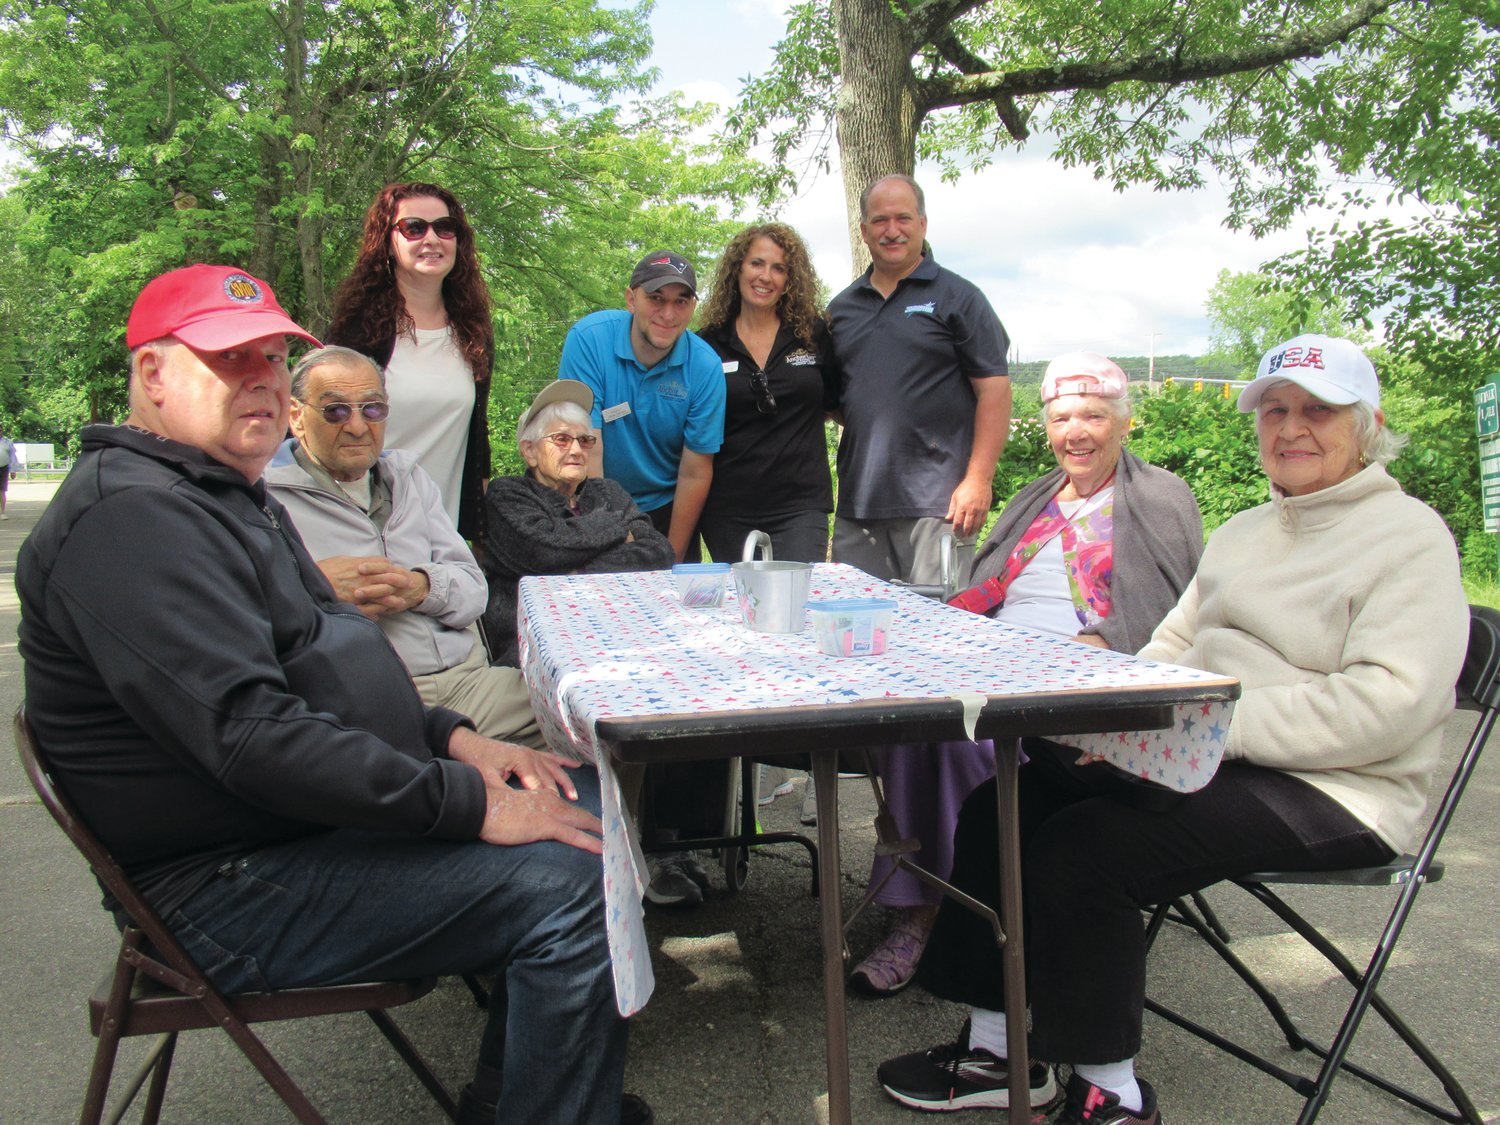 ANCHOR ANNEX: Anchor Bay at Pocasset staffers Gienevieve Ferucio, Laurie Spicuzza and Dan Marcello along with Johnston town Councilman Robert Civetti enjoy a break after serving coffee to residents Shirley, Anne, Paulione, Charlie and Chuck.